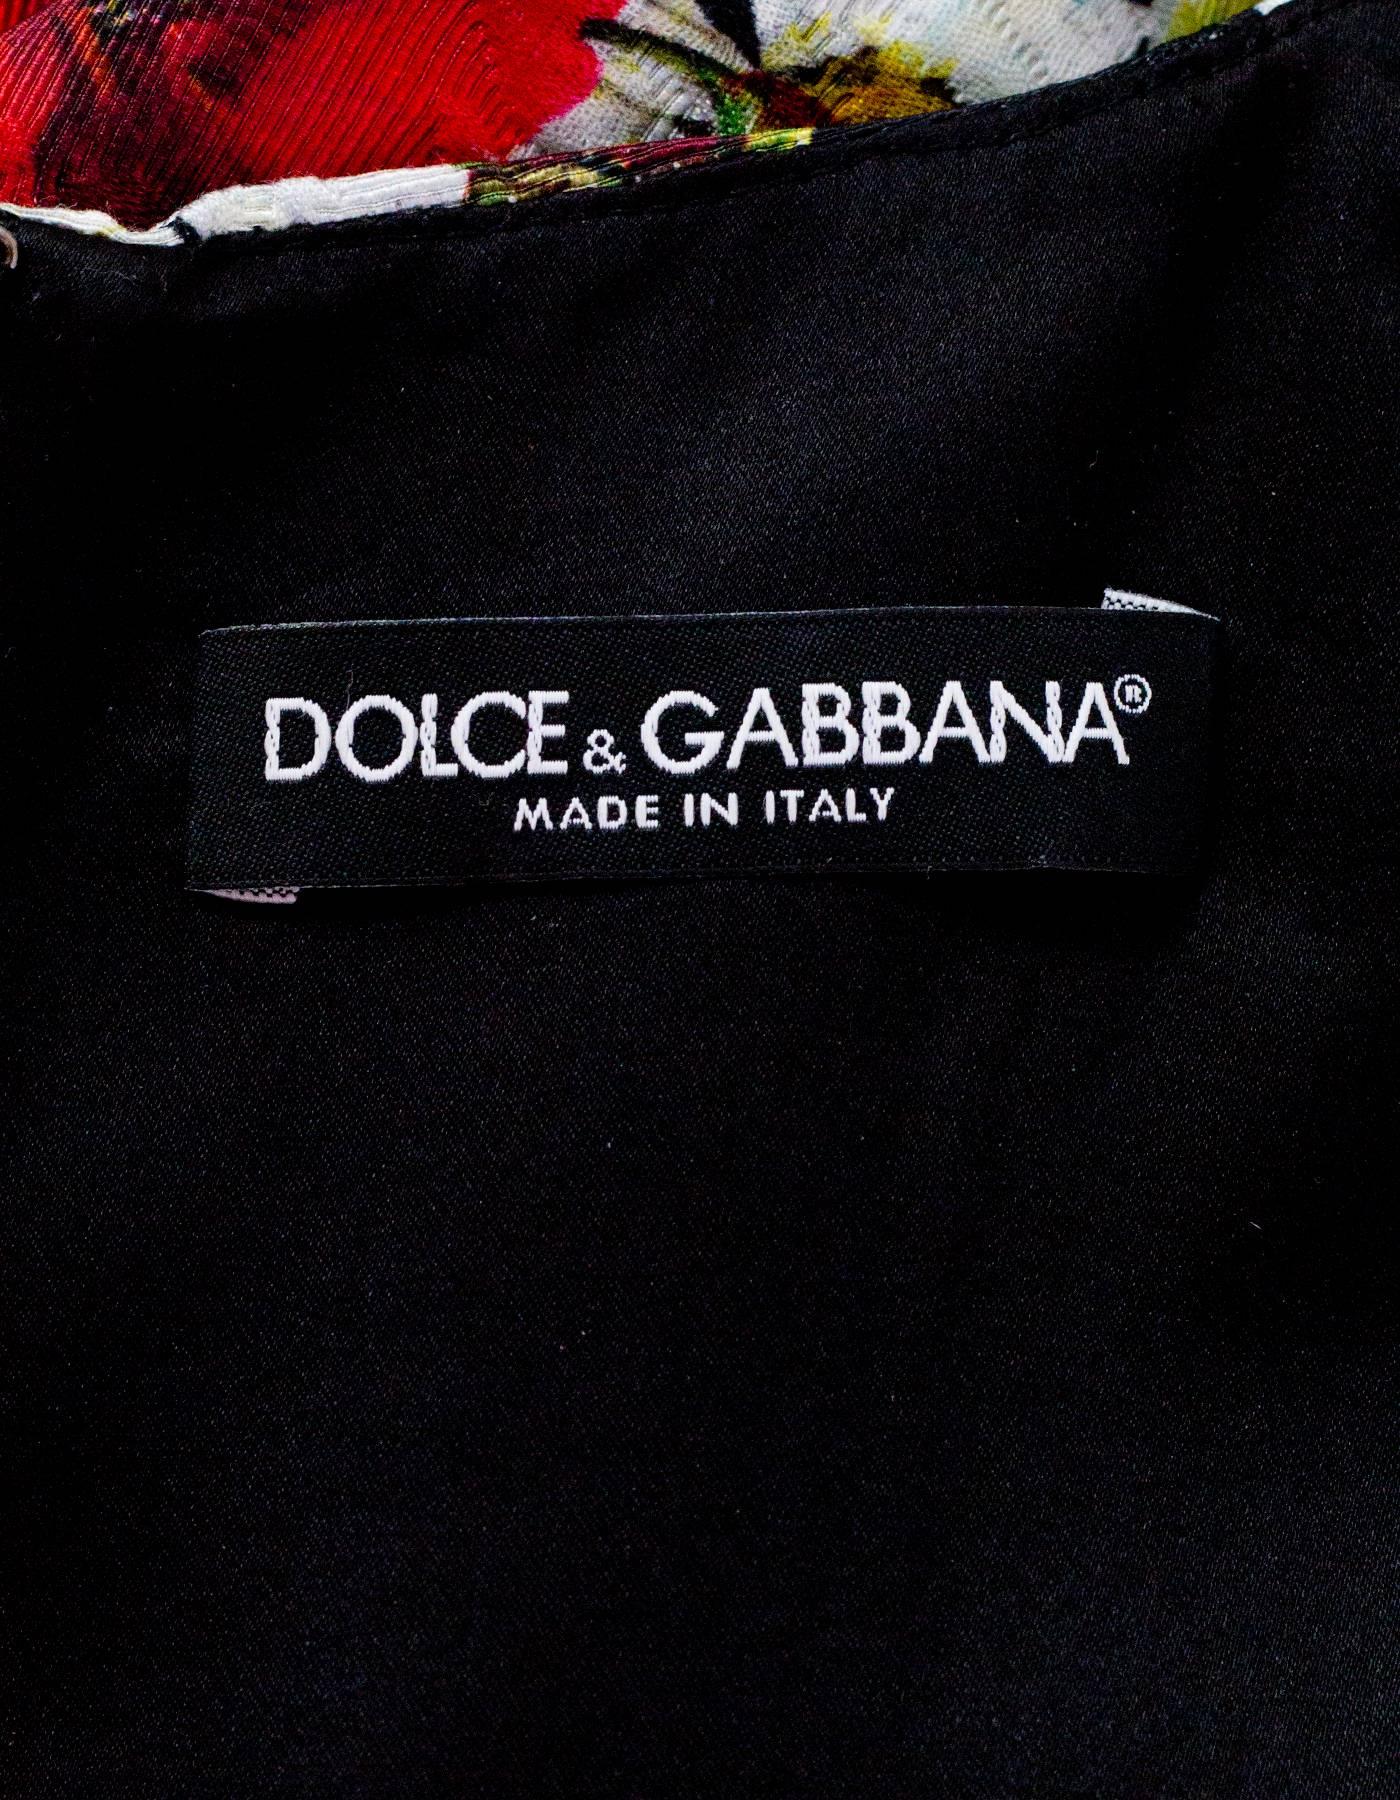 dolce and gabbana dresses 2016